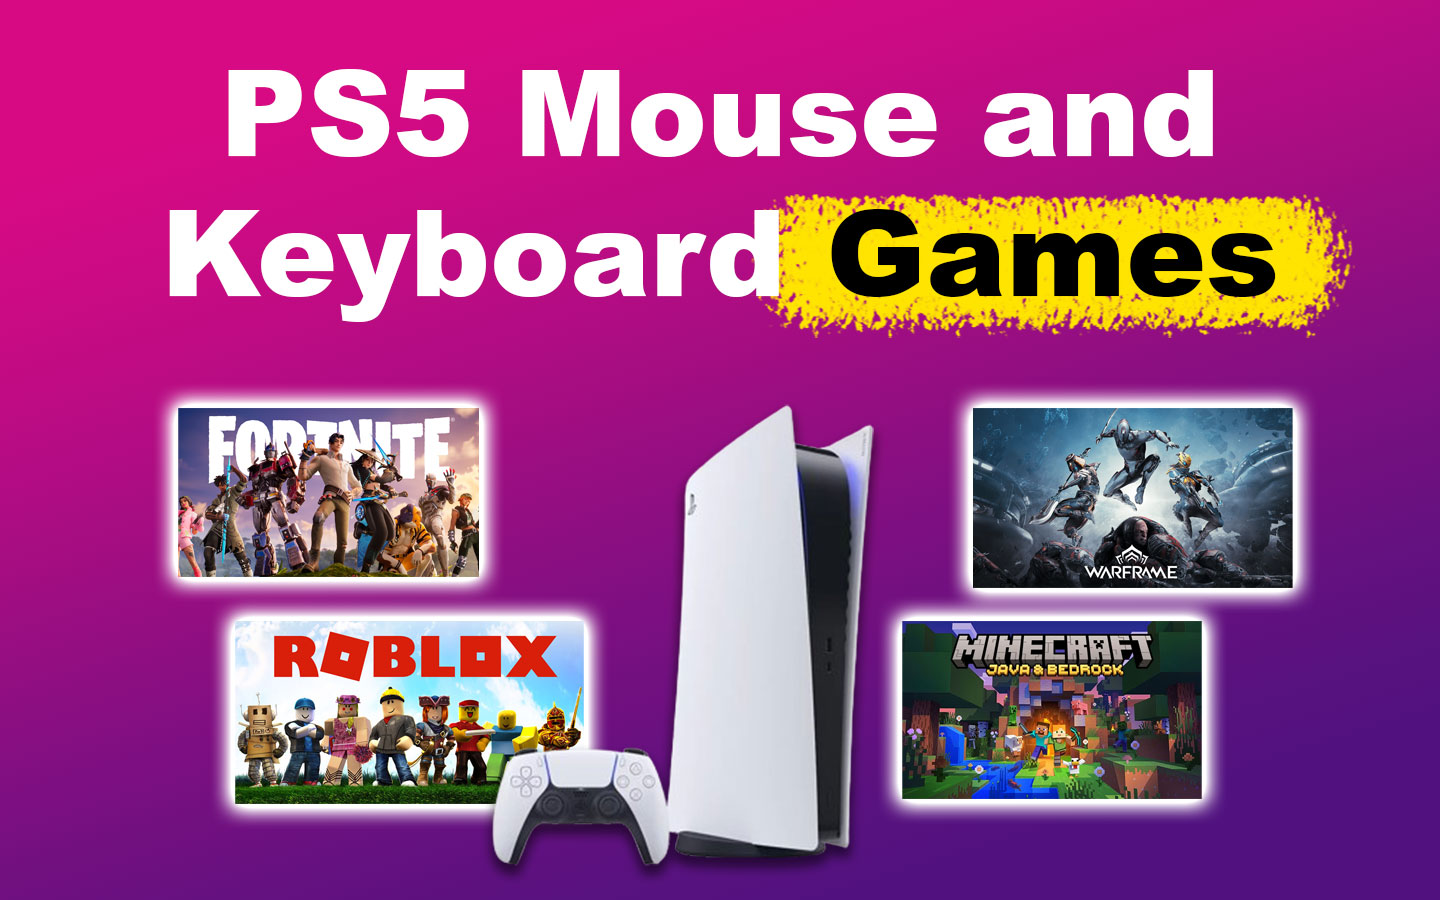 PS5 Mouse and Keyboard Games